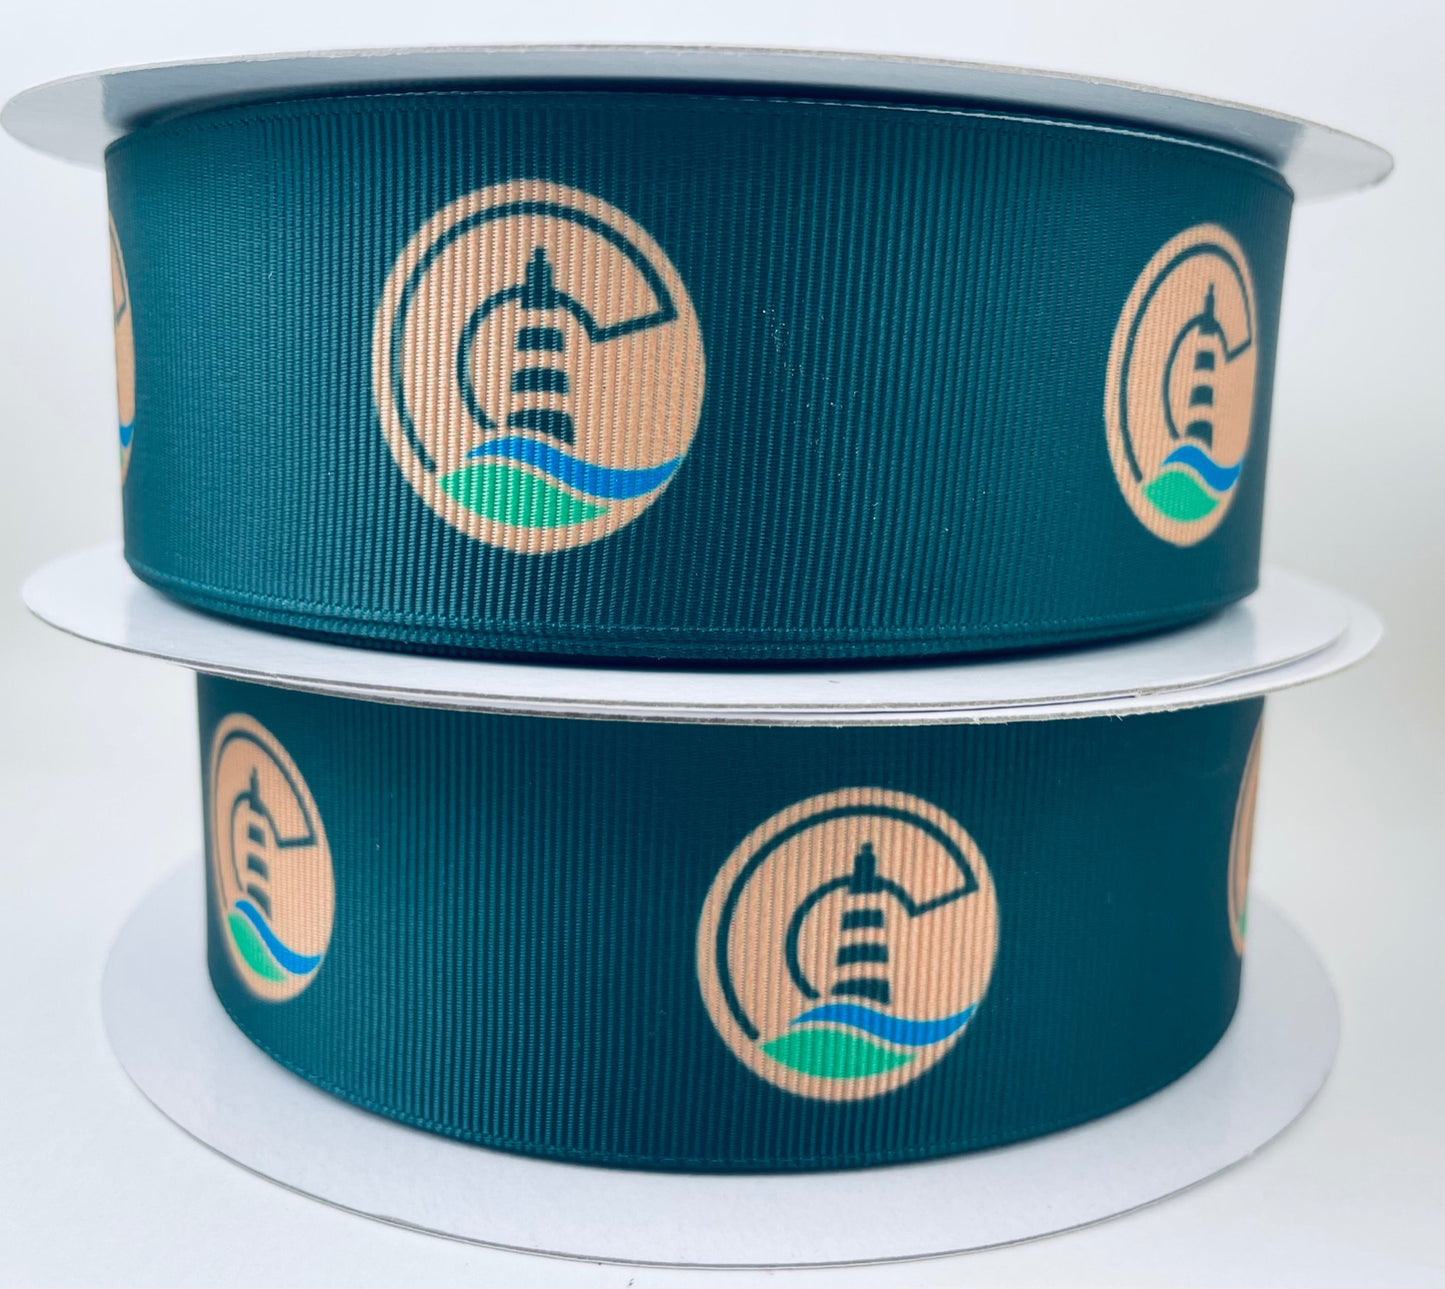 5/8" Sublimated Grosgrain Printed Ribbon By The Roll